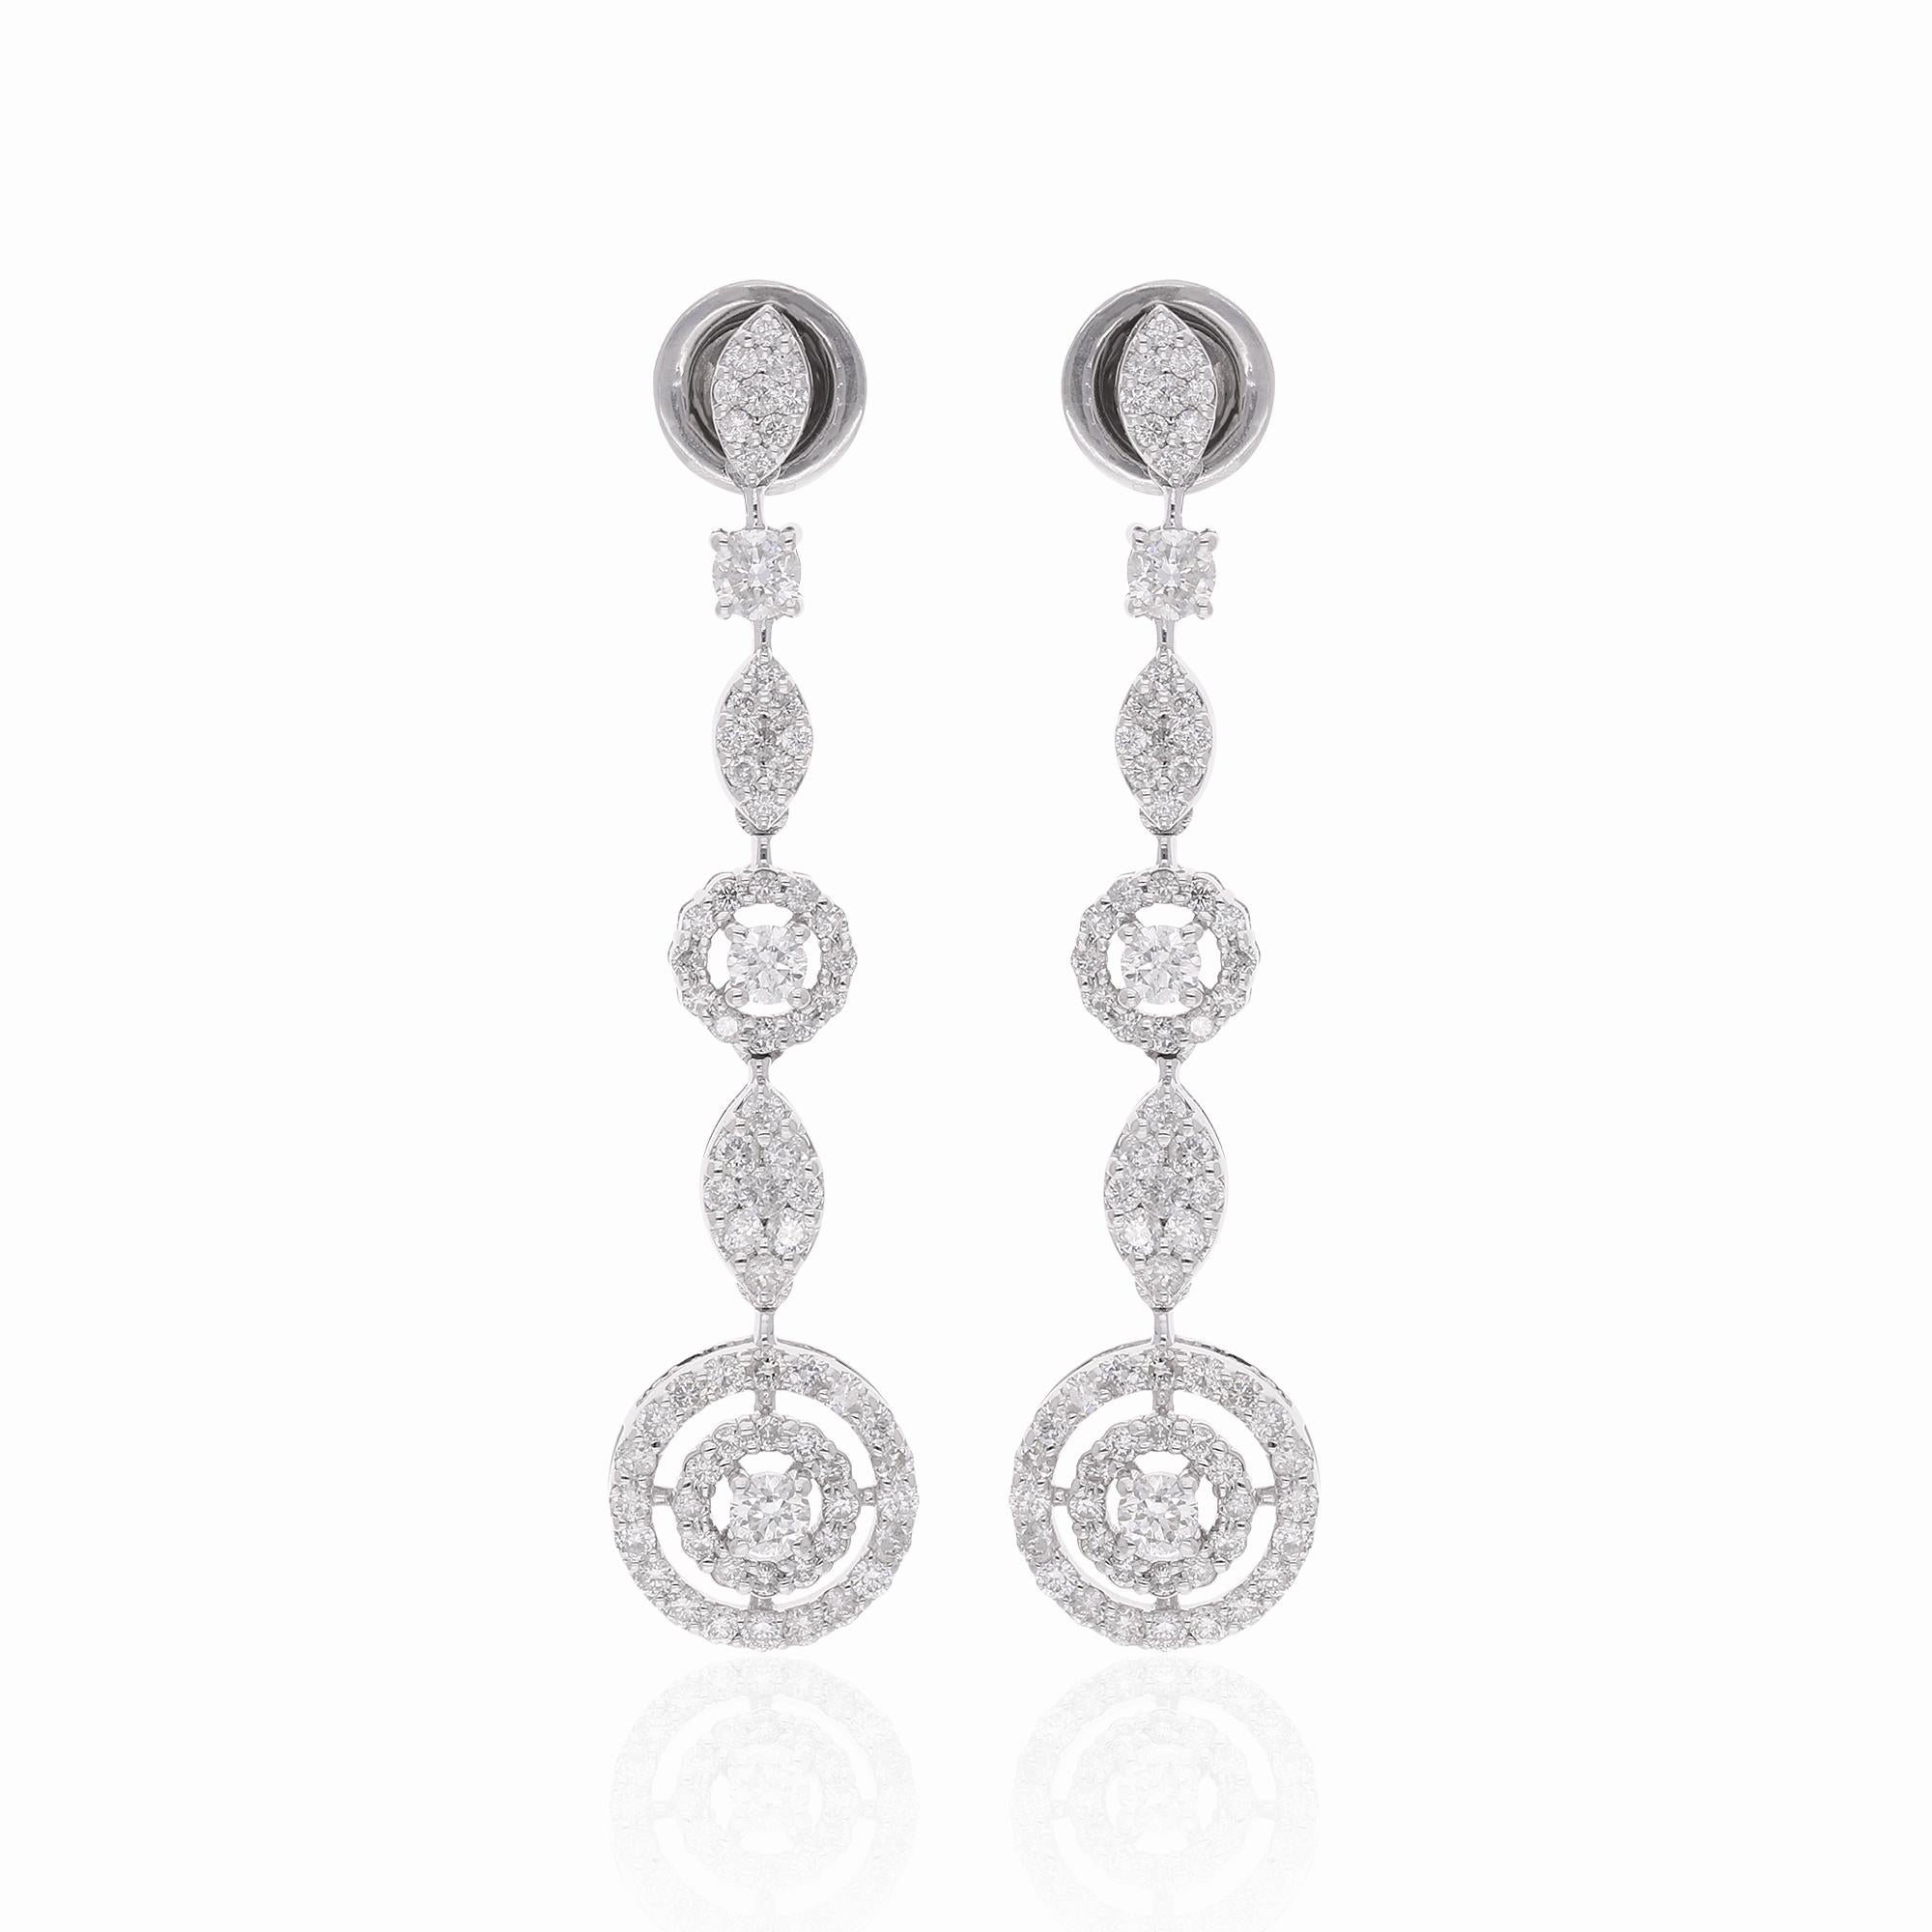 Item Code :- SEE-13768
Gross Wt. :- 6.48 gm
18k White Gold Wt. :- 6.12 gm
'Natural Diamond Wt. :- 1.81 Ct.  (AVERAGE DIAMOND CLARITY SI1-SI2 AND COLOR H-I)
Earrings Size :- 44 mm approx.

✦ Sizing
.....................
We can adjust most items to